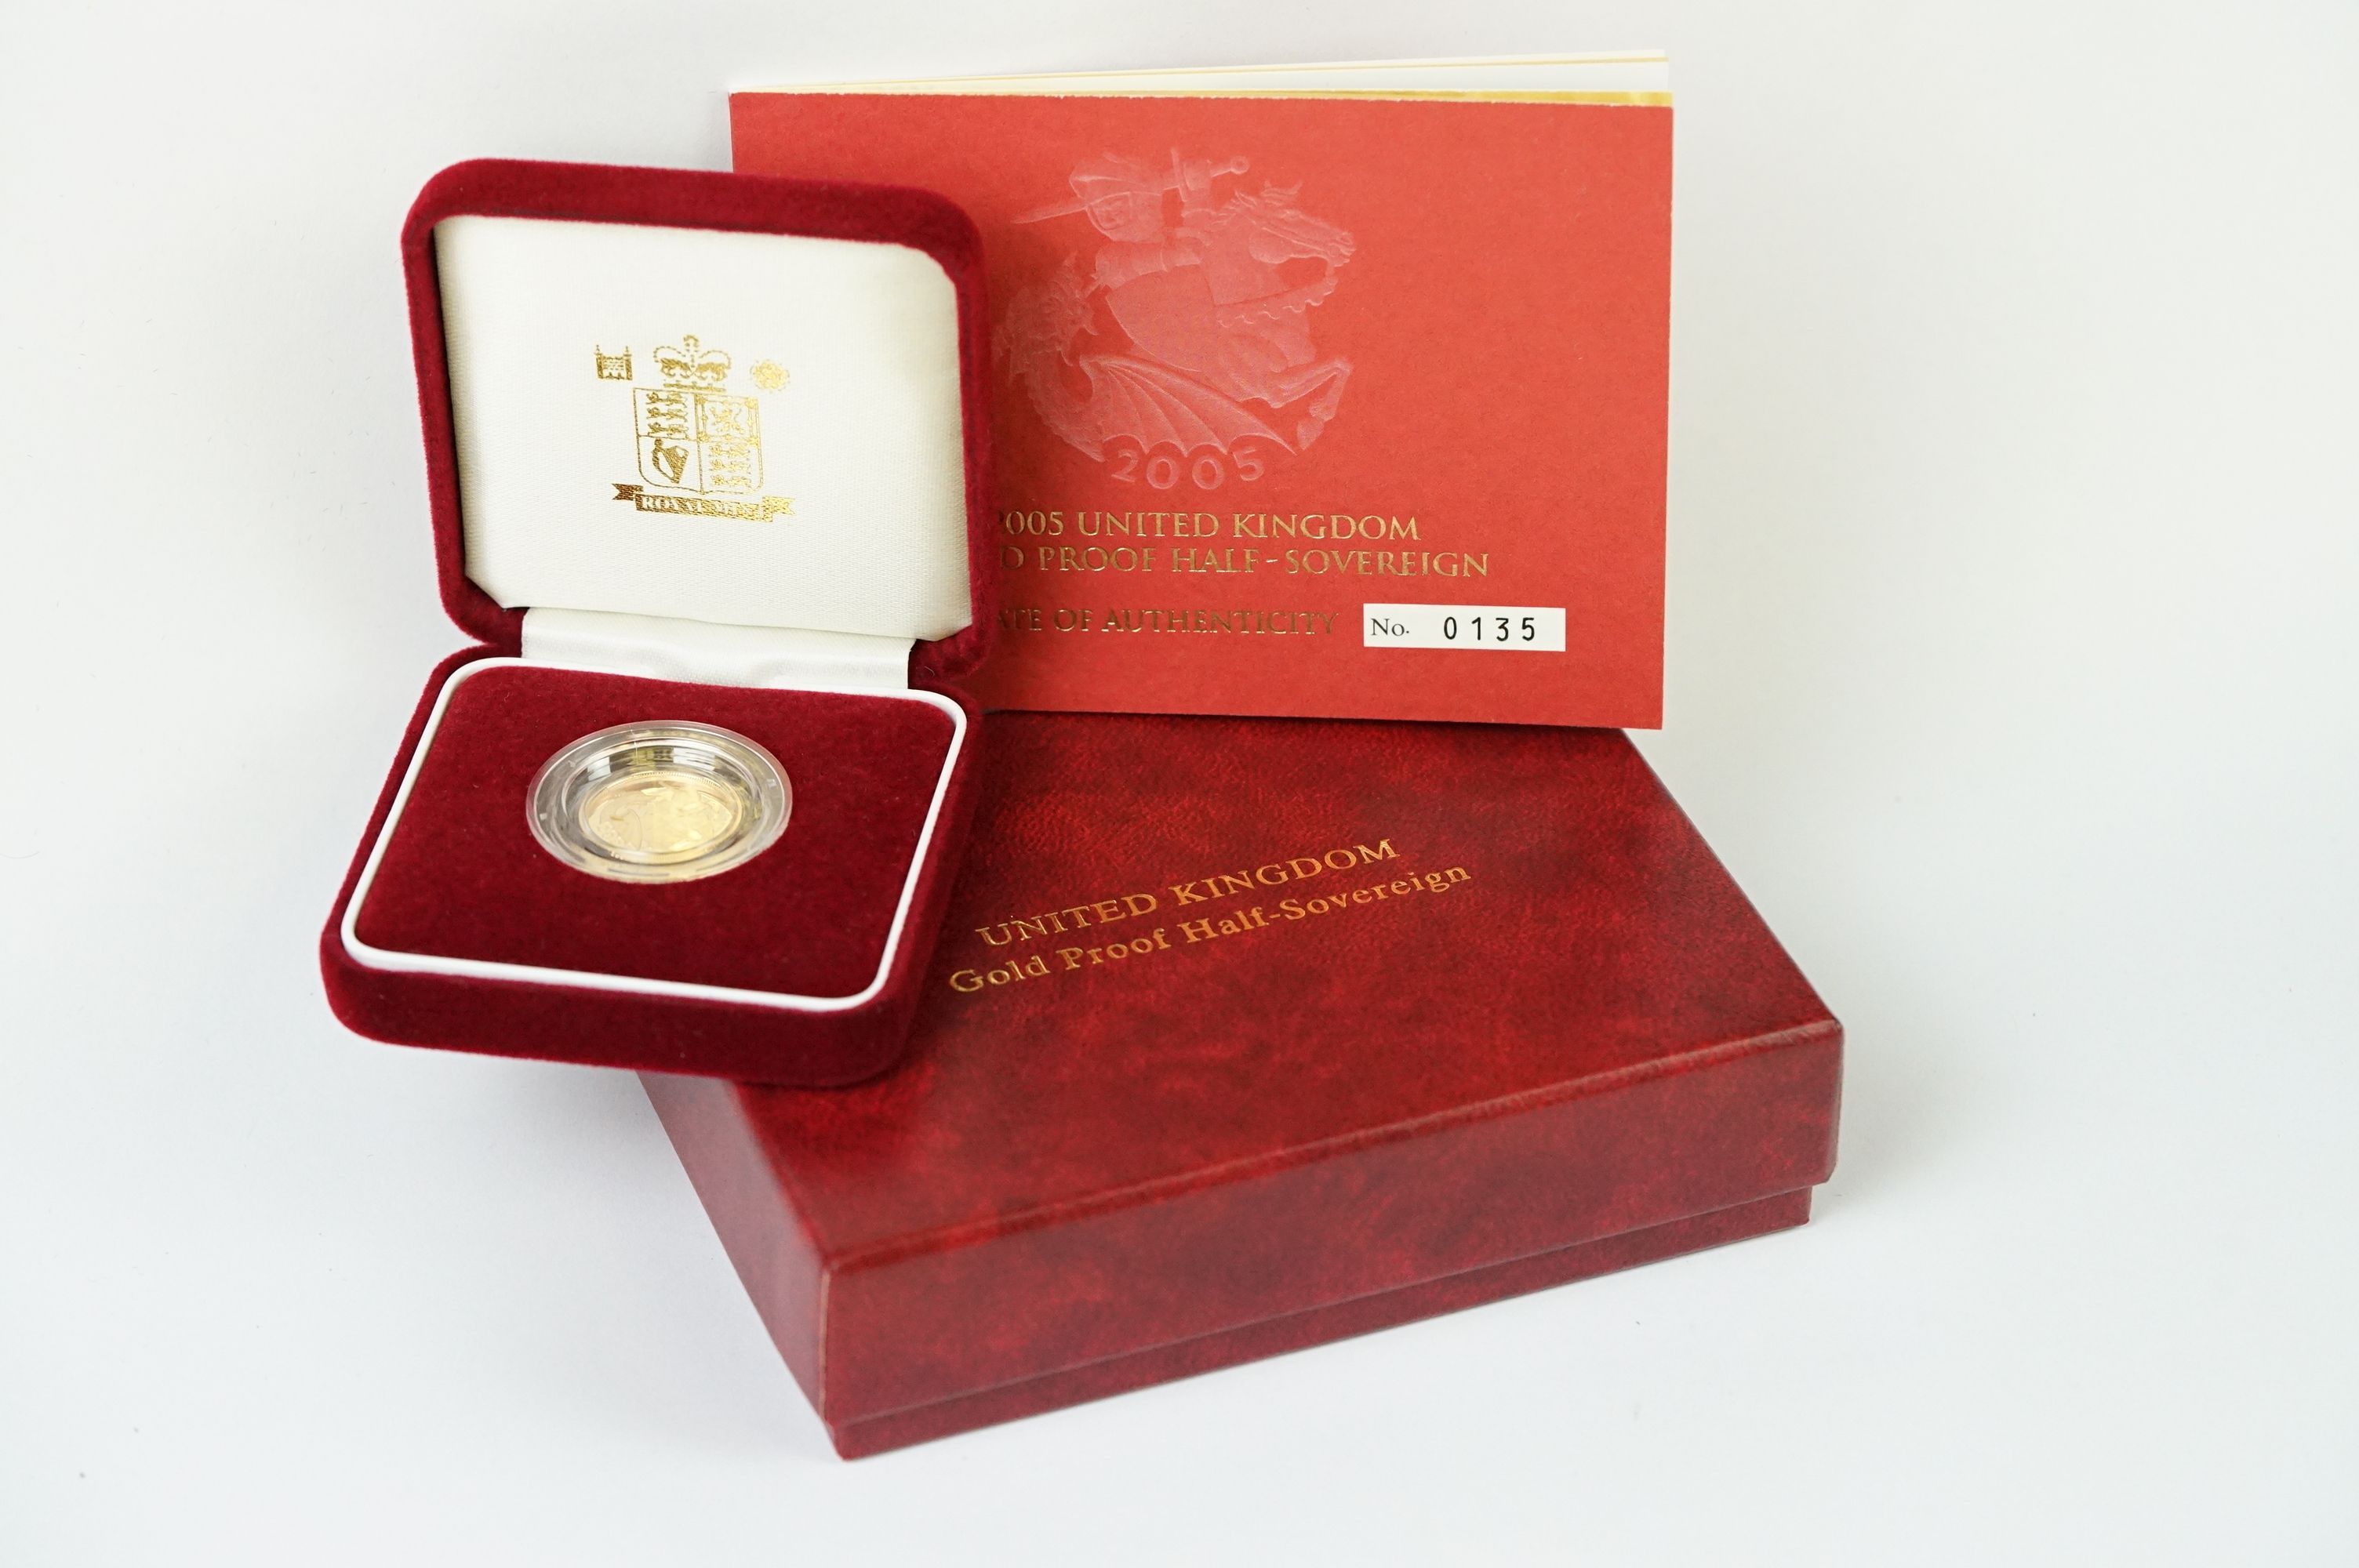 A Royal Mint United Kingdom 2005 gold proof half sovereign coin, encapsulated and set within red